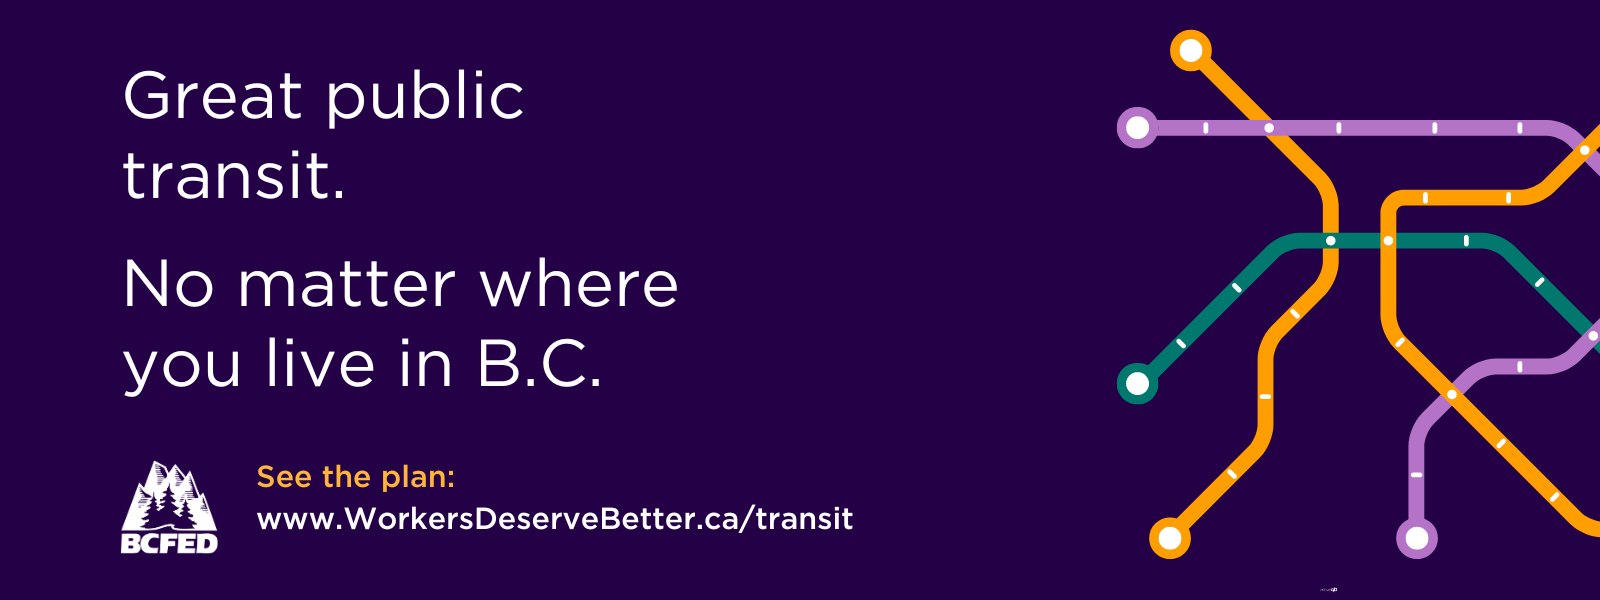 Great public transit. No matter where in BC you live.